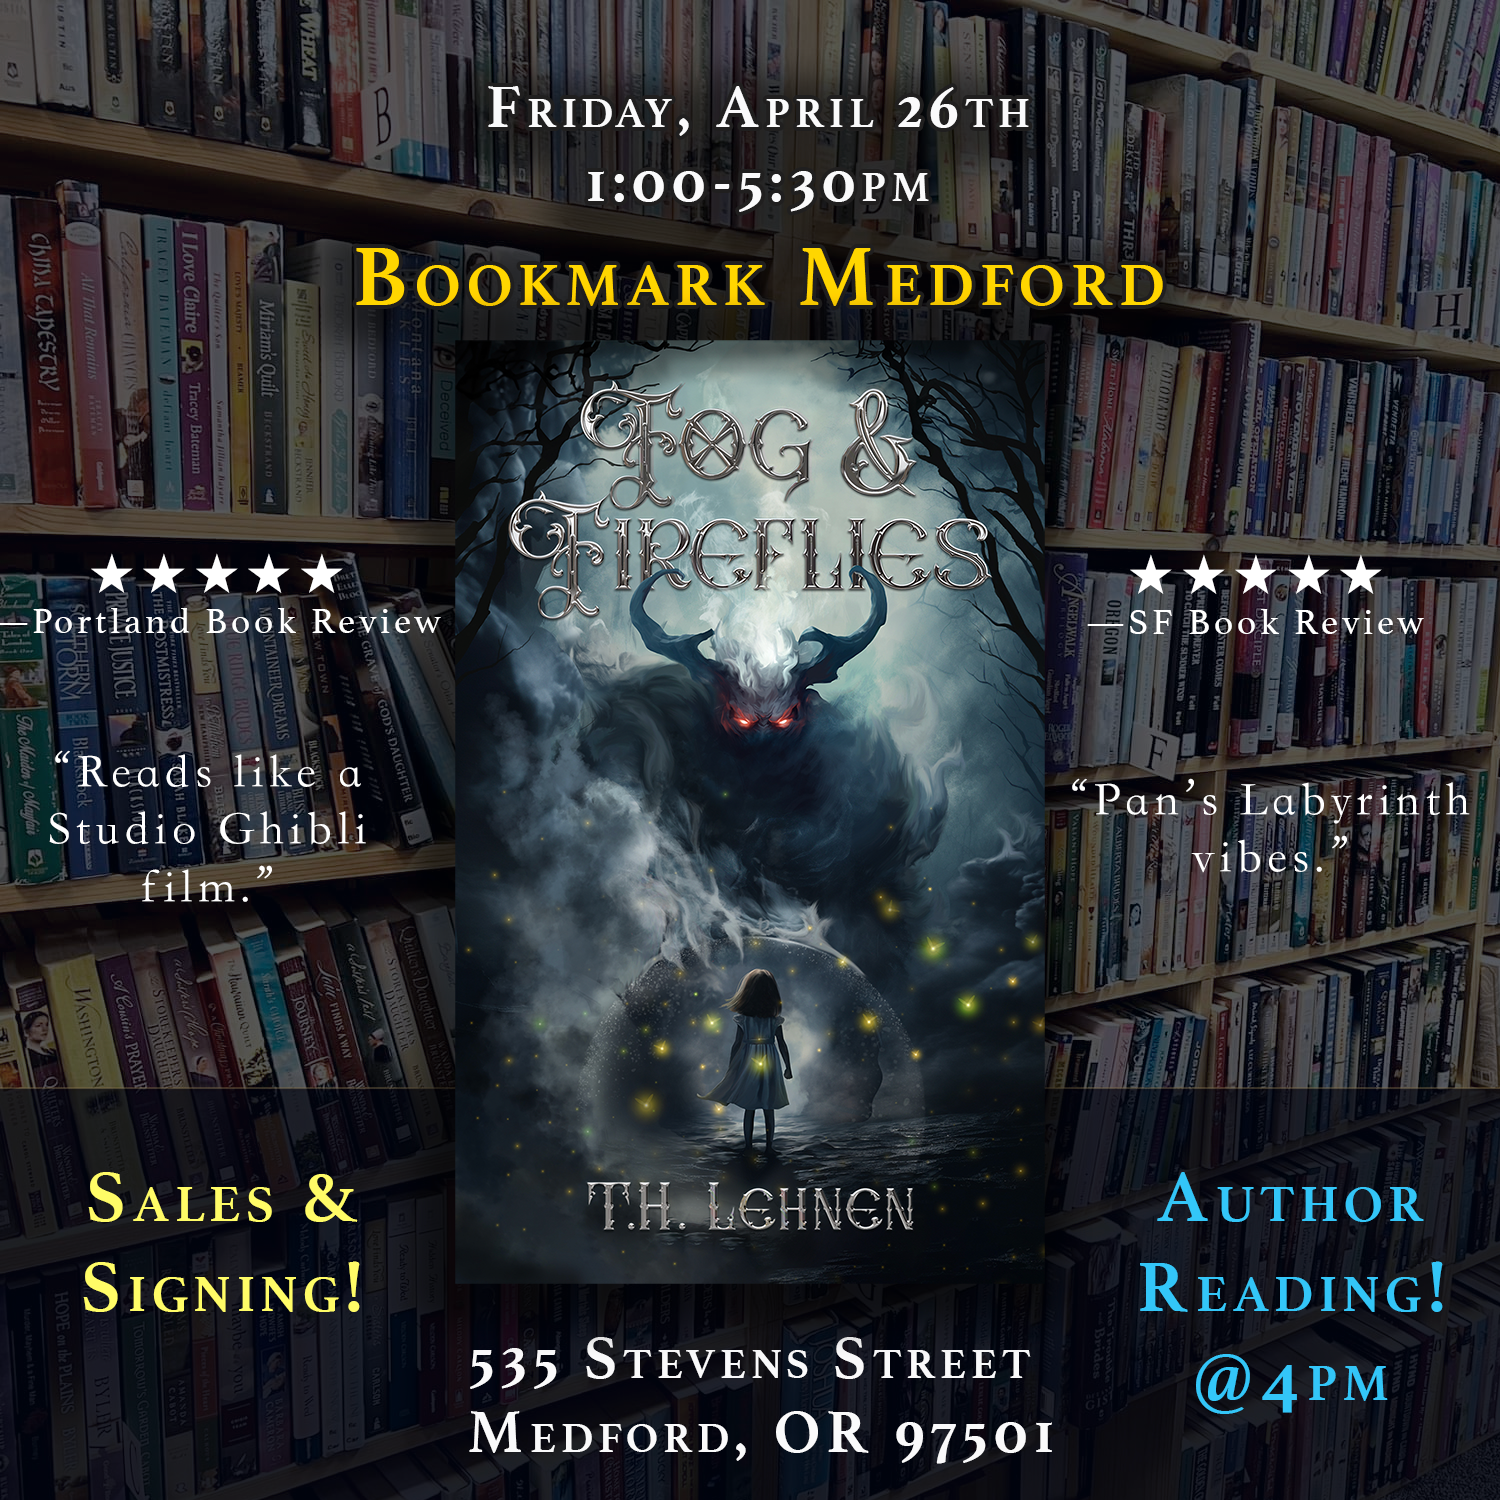 Fog & Fireflies event at Bookmark Medford Friday April 26th, from 1-5:30pm, reading at 4pm